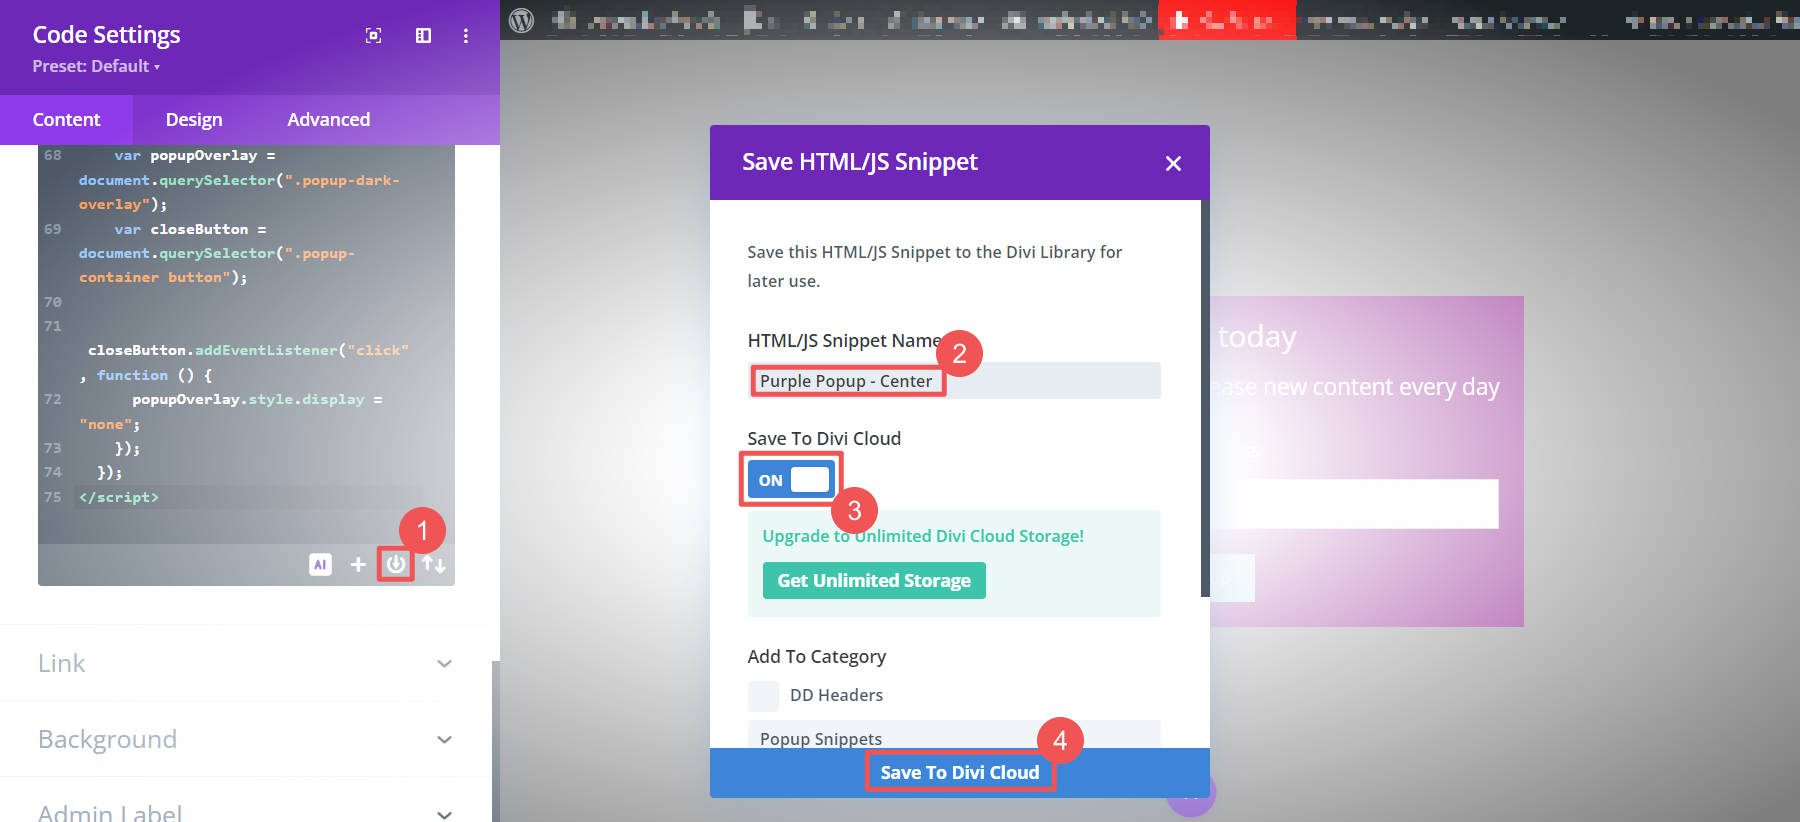 Save AI Code Snippets to Divi Cloud